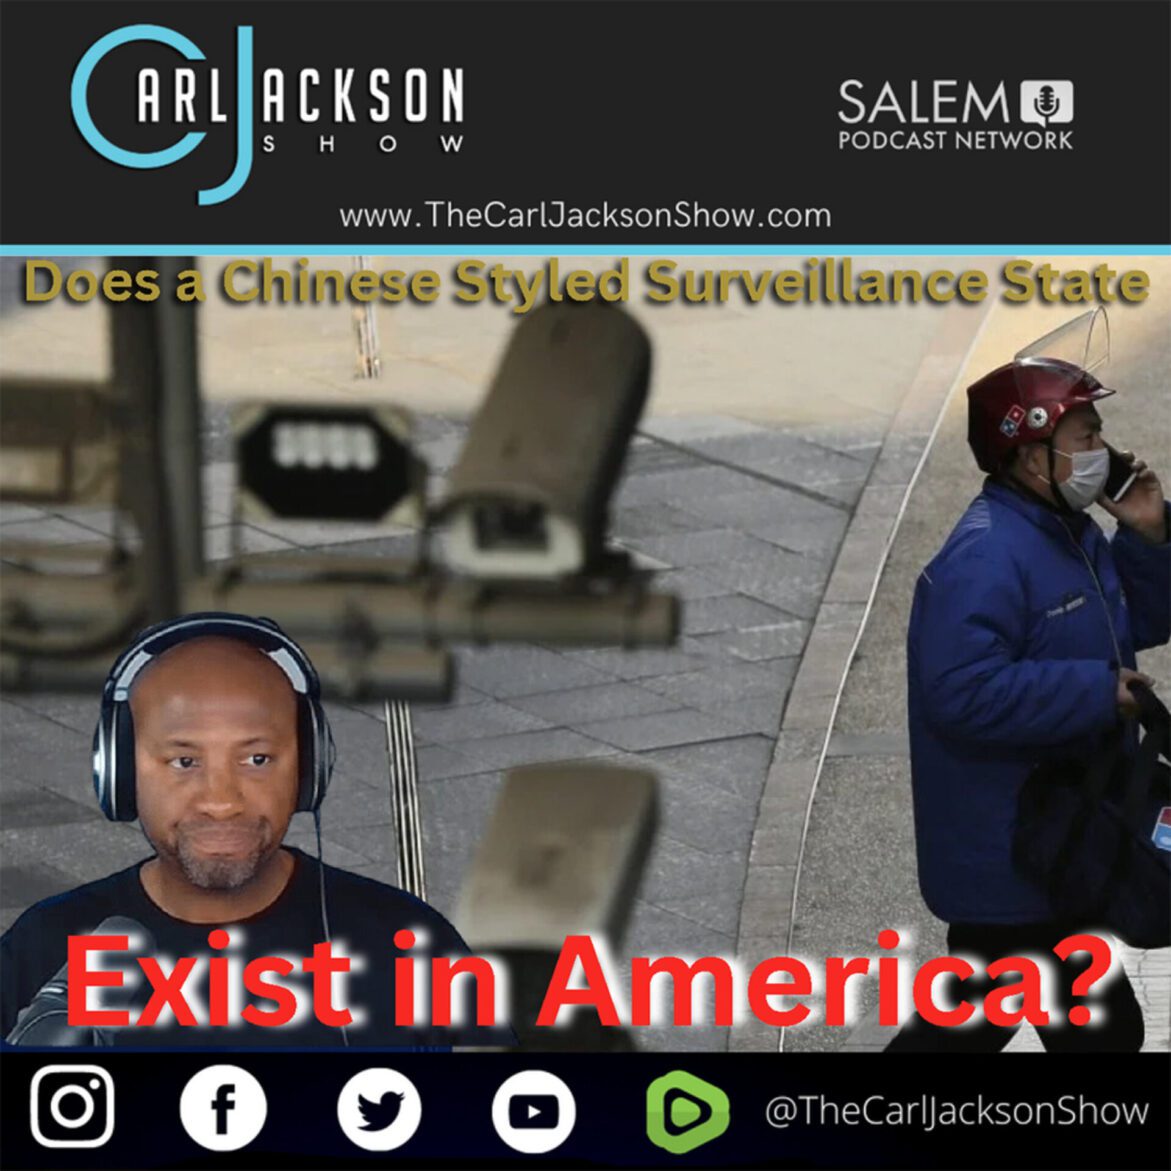 Black Podcasting - Does a Chinese Styled Surveillance State Exist in America?